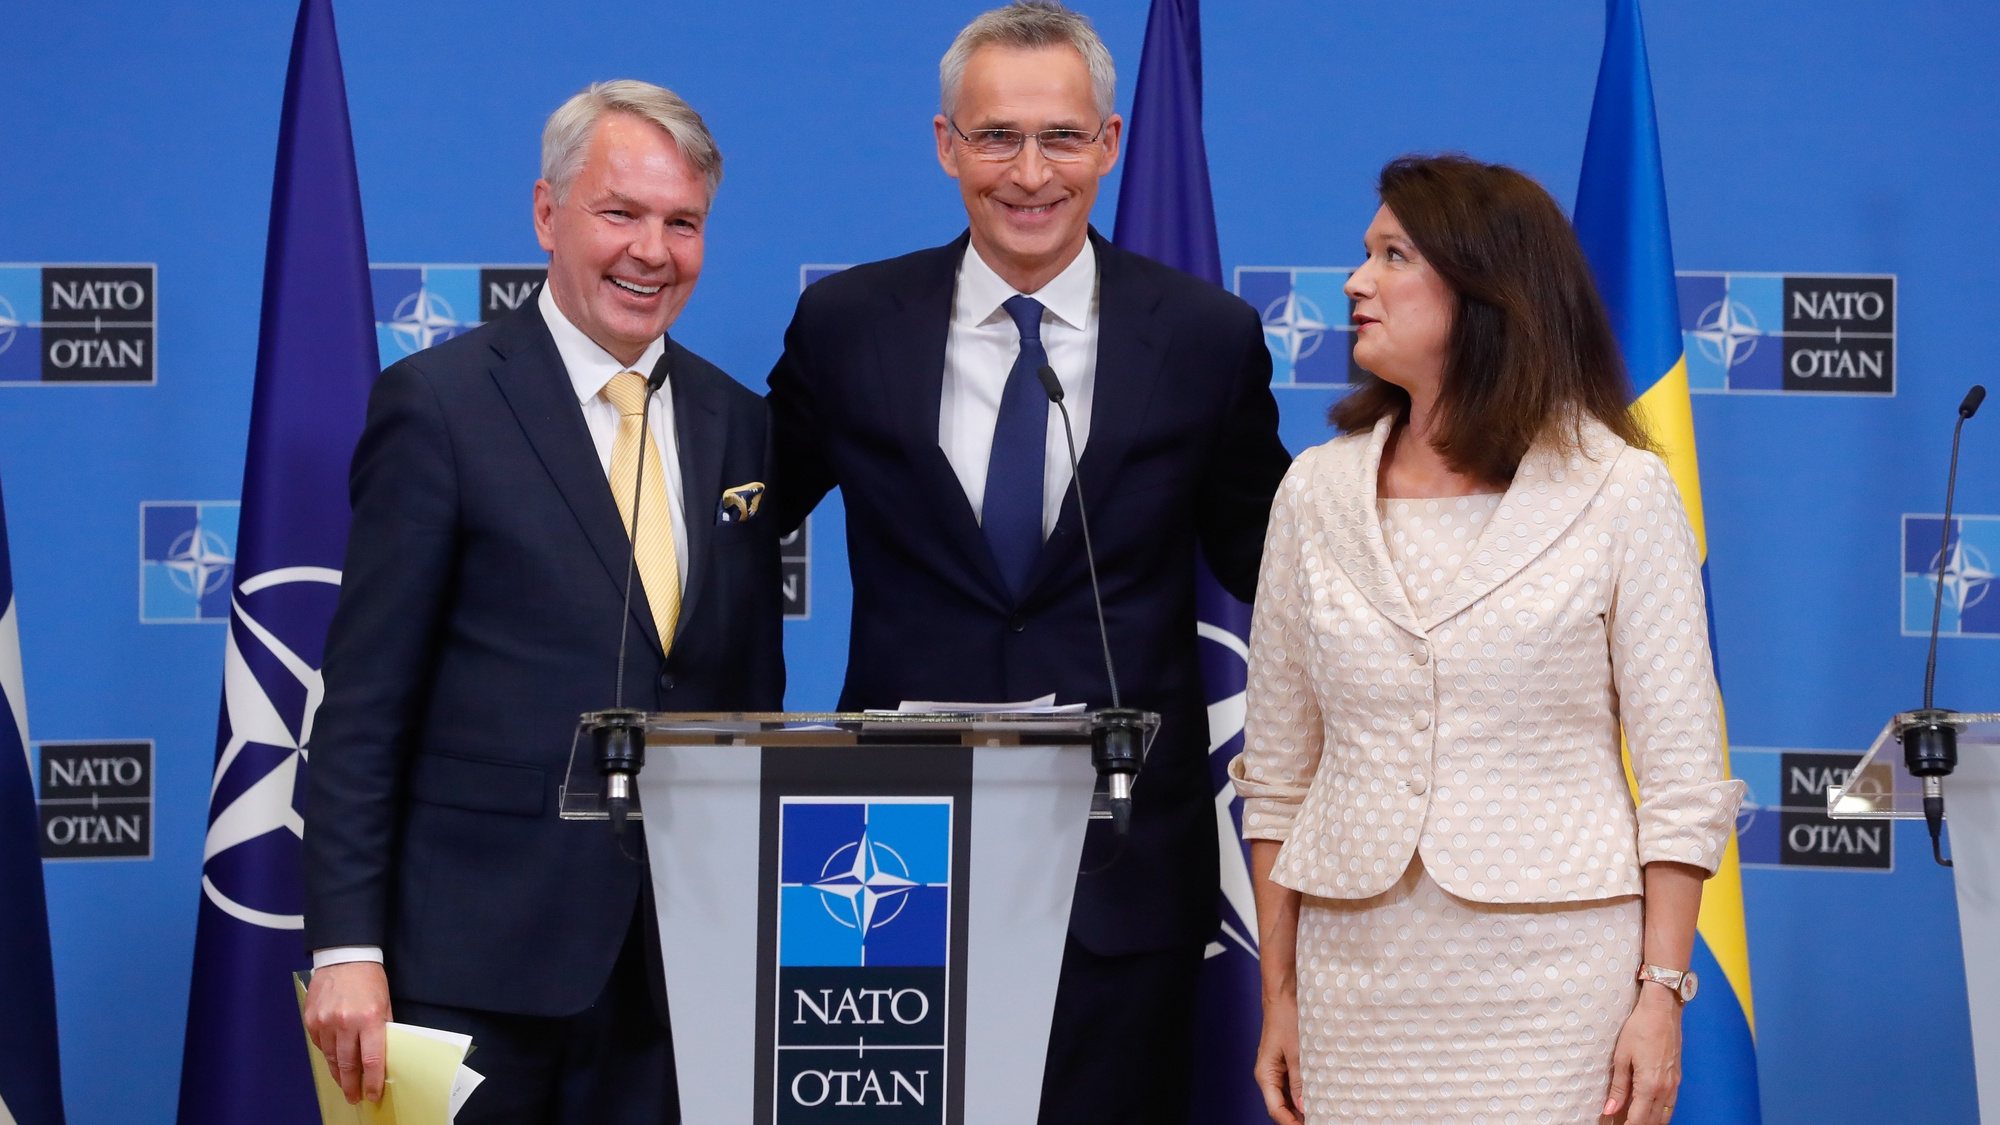 epa10052961 NATO Secretary General Jens Stoltenberg (C), Finland&#039;s Minister of Foreign Affairs Pekka Haavisto (L) and Sweden&#039;s Minister of Foreign Affairs Ann Linde pose for a picture at the end of a joint press conference after the signature of the accession protocols to NATO of Finland and Sweden, at NATO headquarters in Brussels, Belgium, 05 July 2022.  EPA/STEPHANIE LECOCQ